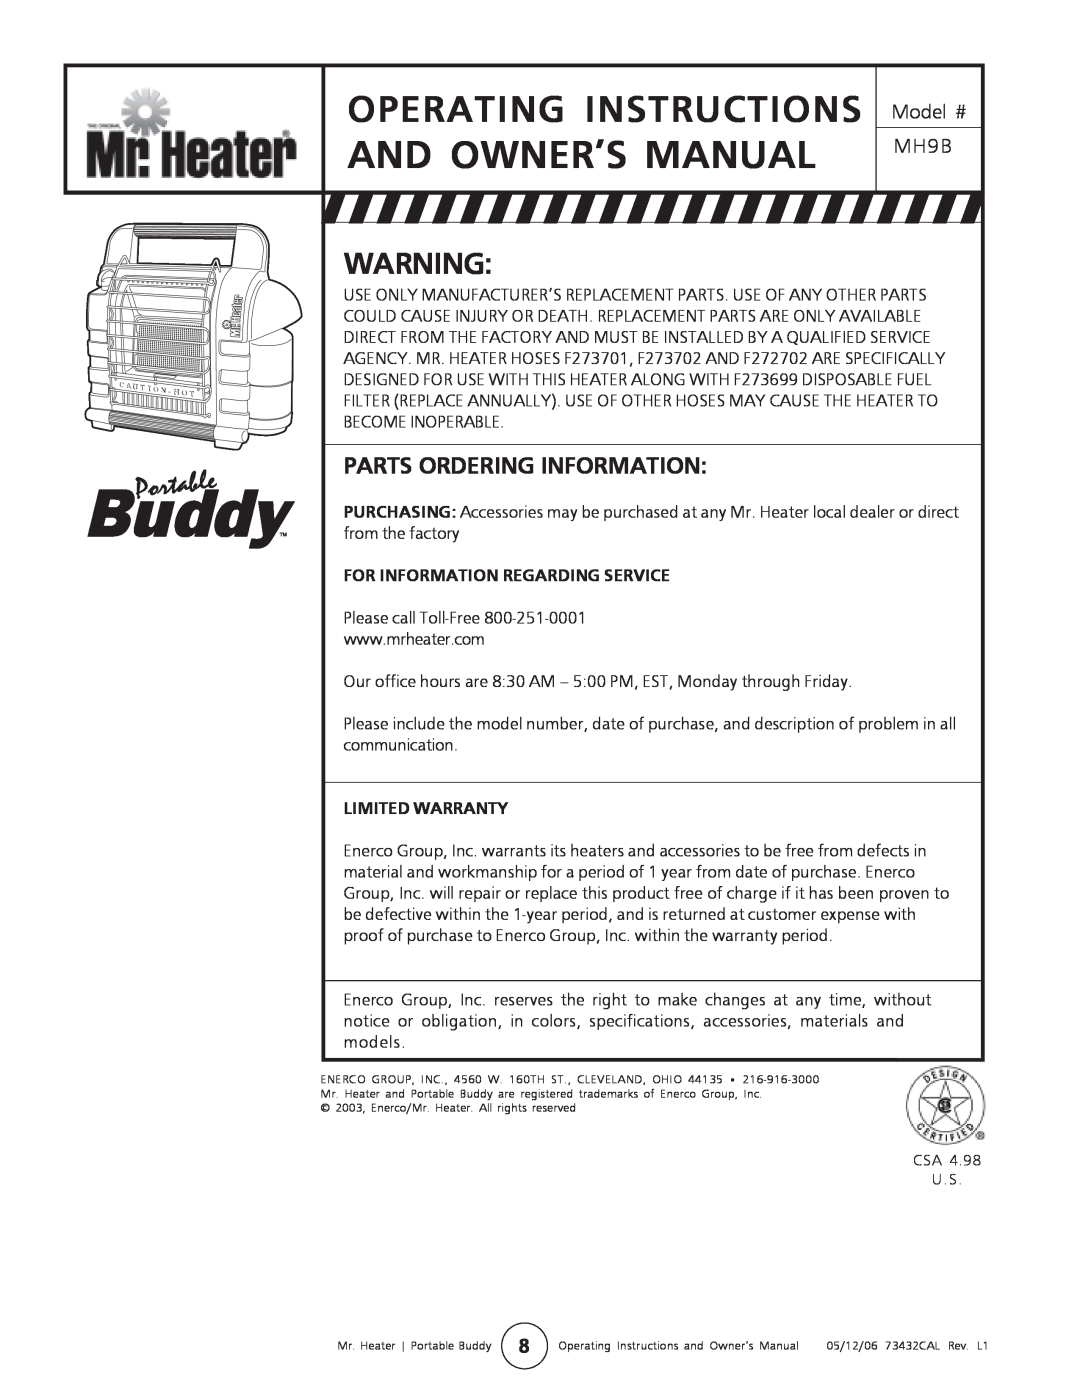 Mr. Heater MH9B Operating Instructions, Parts Ordering Information, For Information Regarding Service, Limited Warranty 